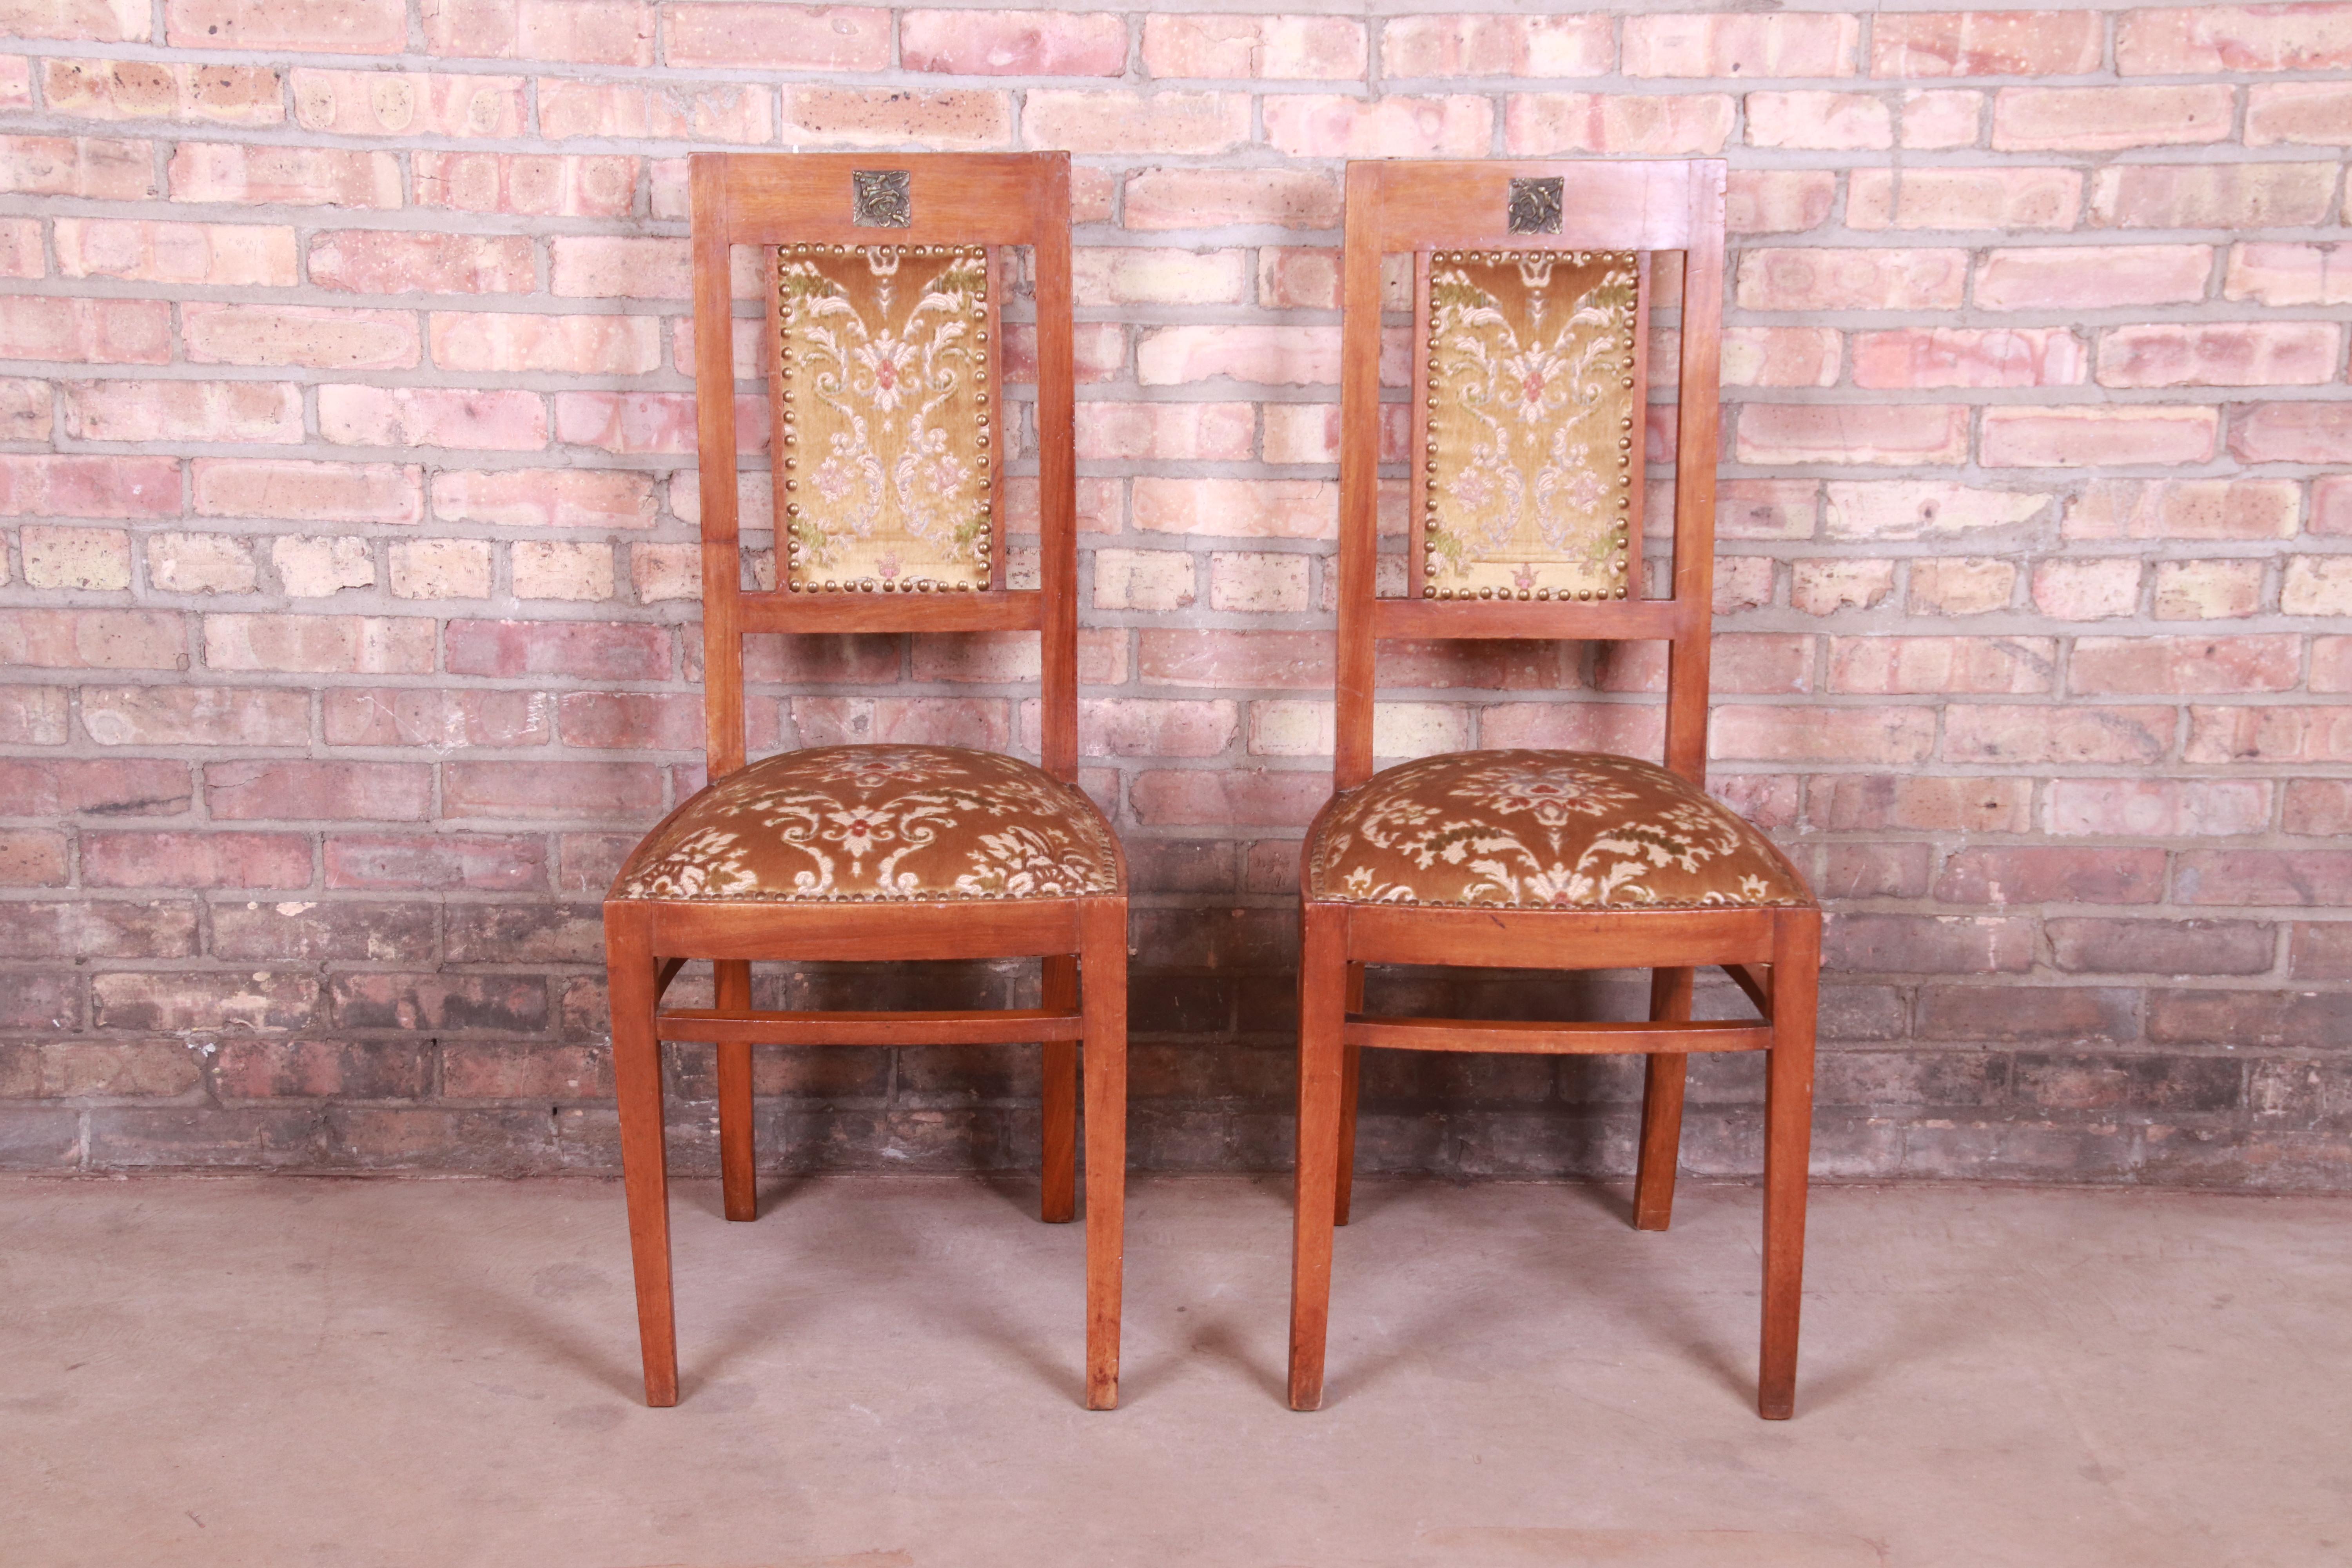 A gorgeous pair of Art Deco side chairs

Early 20th century

Solid wood frames, with brass insets and cut velvet upholstery.

Measures: 16.5